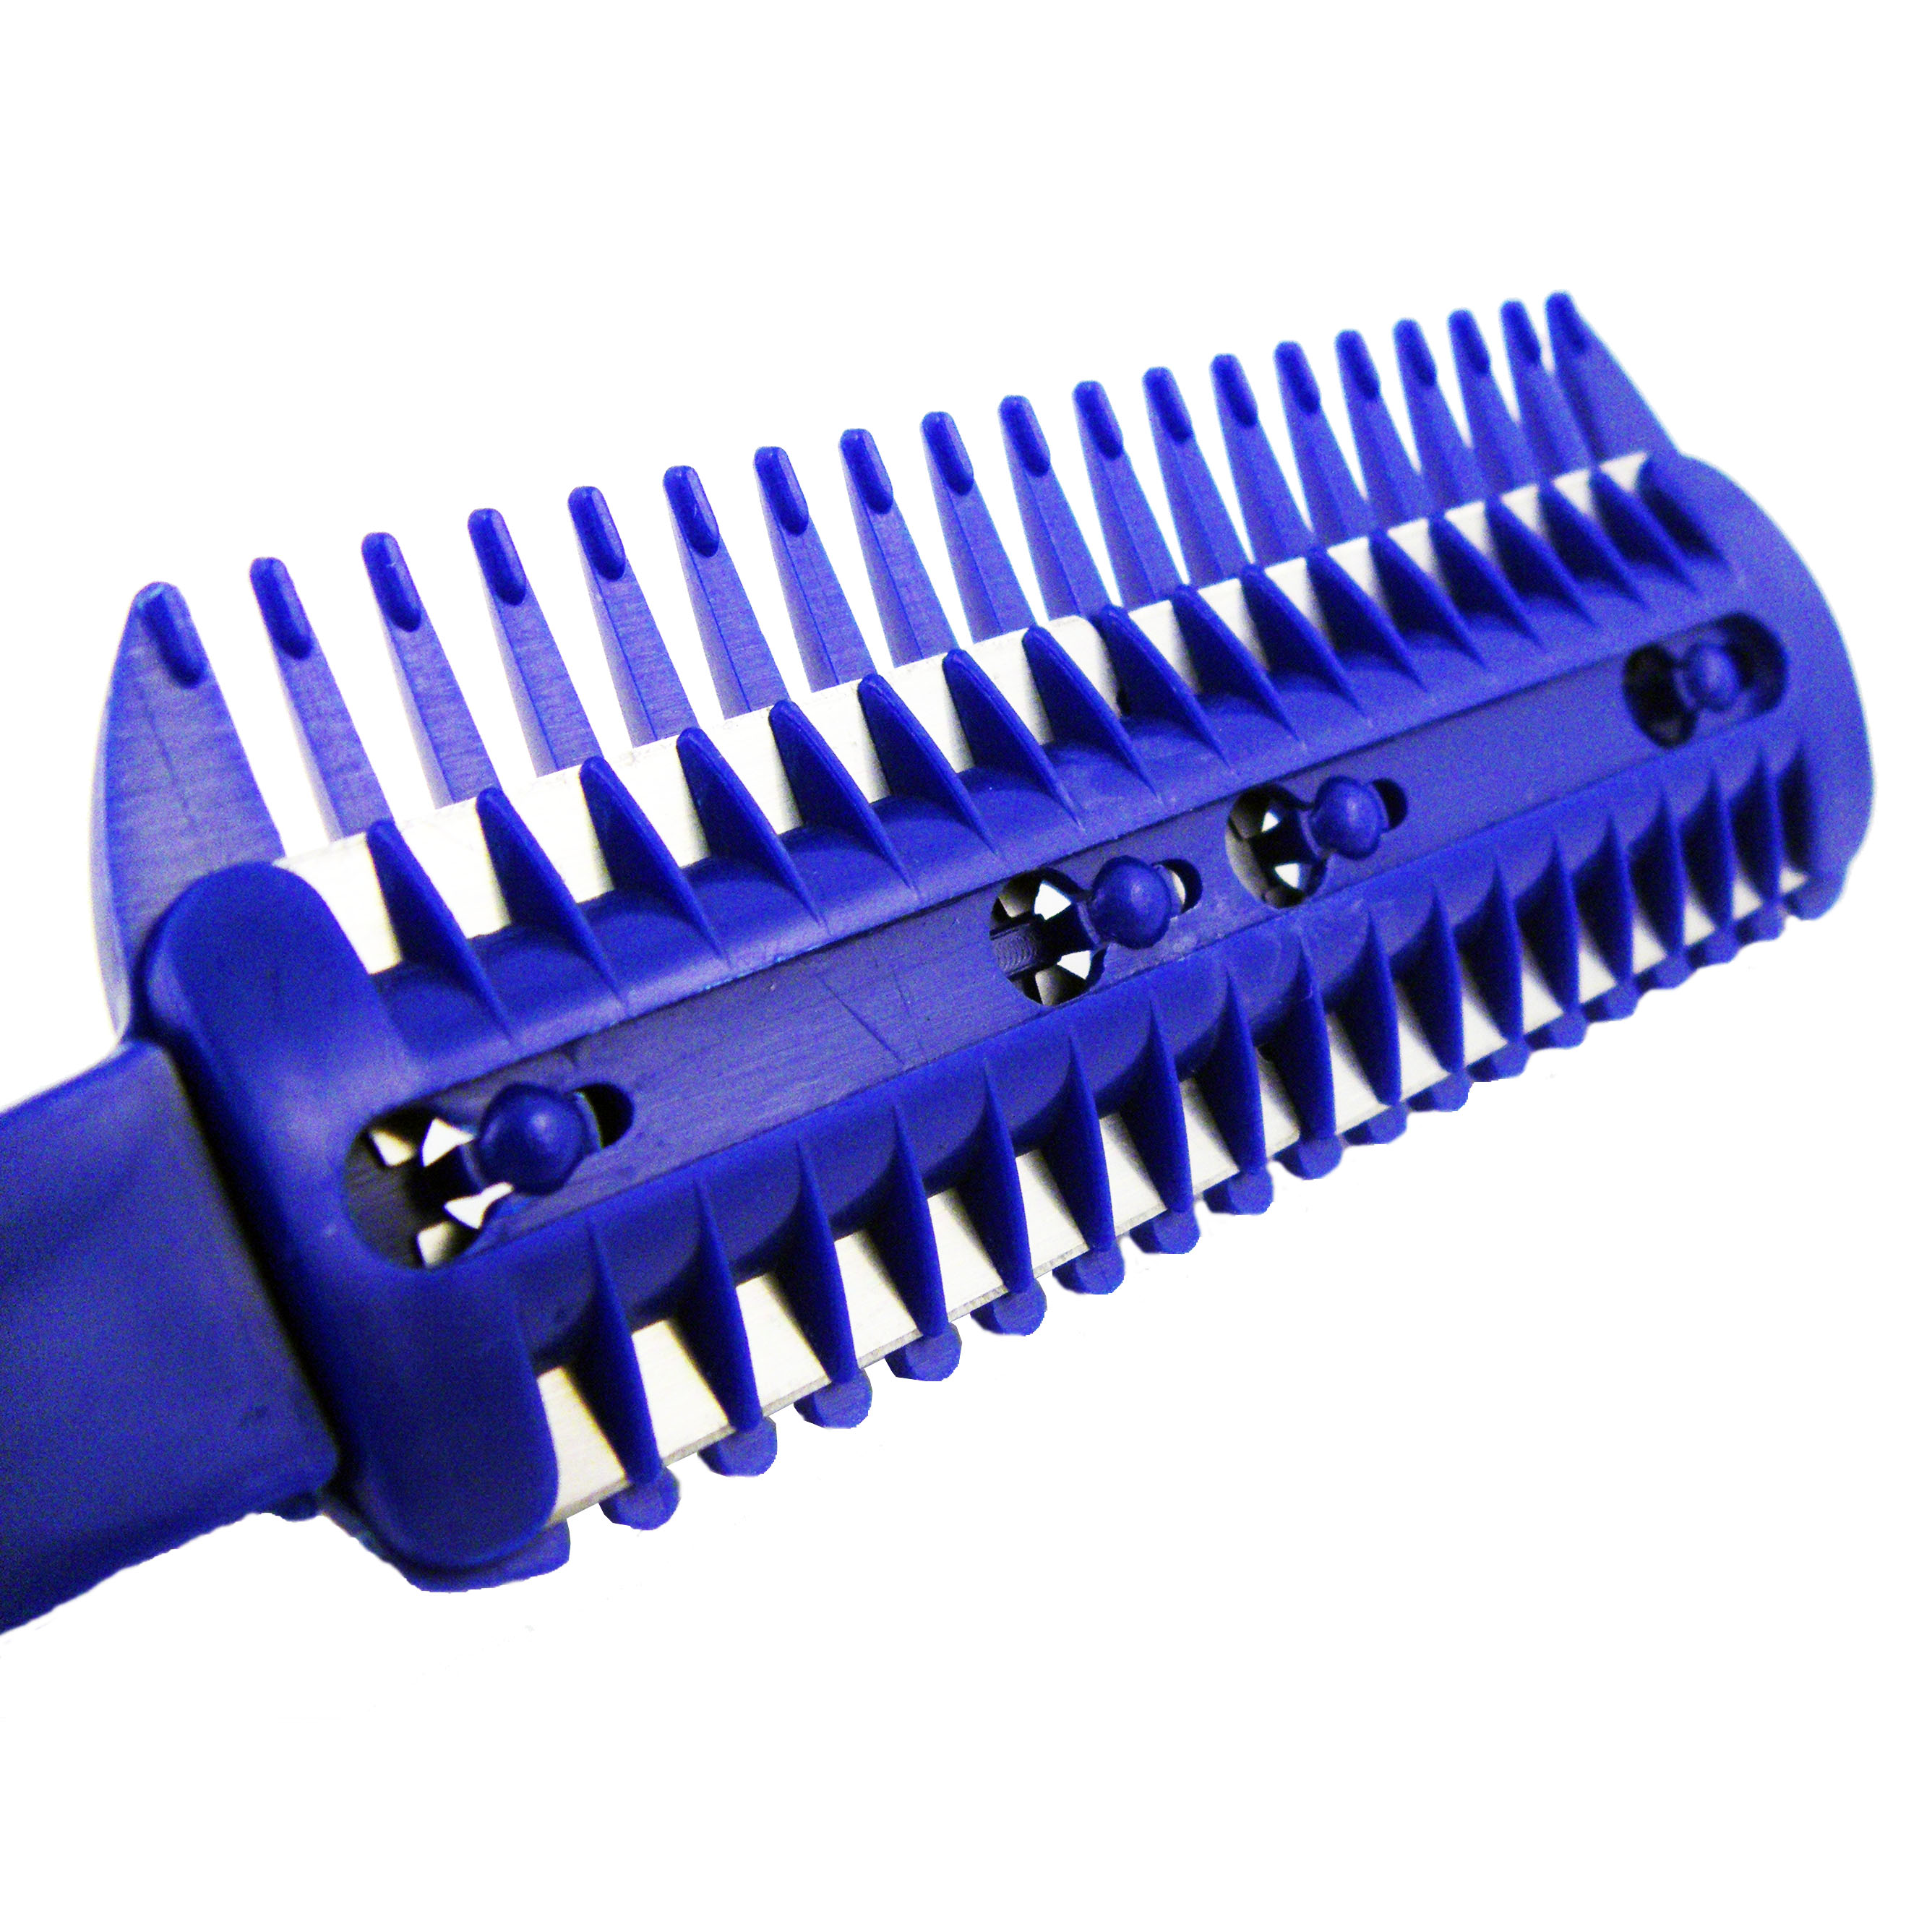 Universal Tool Razor Comb Hair Cut Thinning Feathering Trimming with 6 Extra Blades